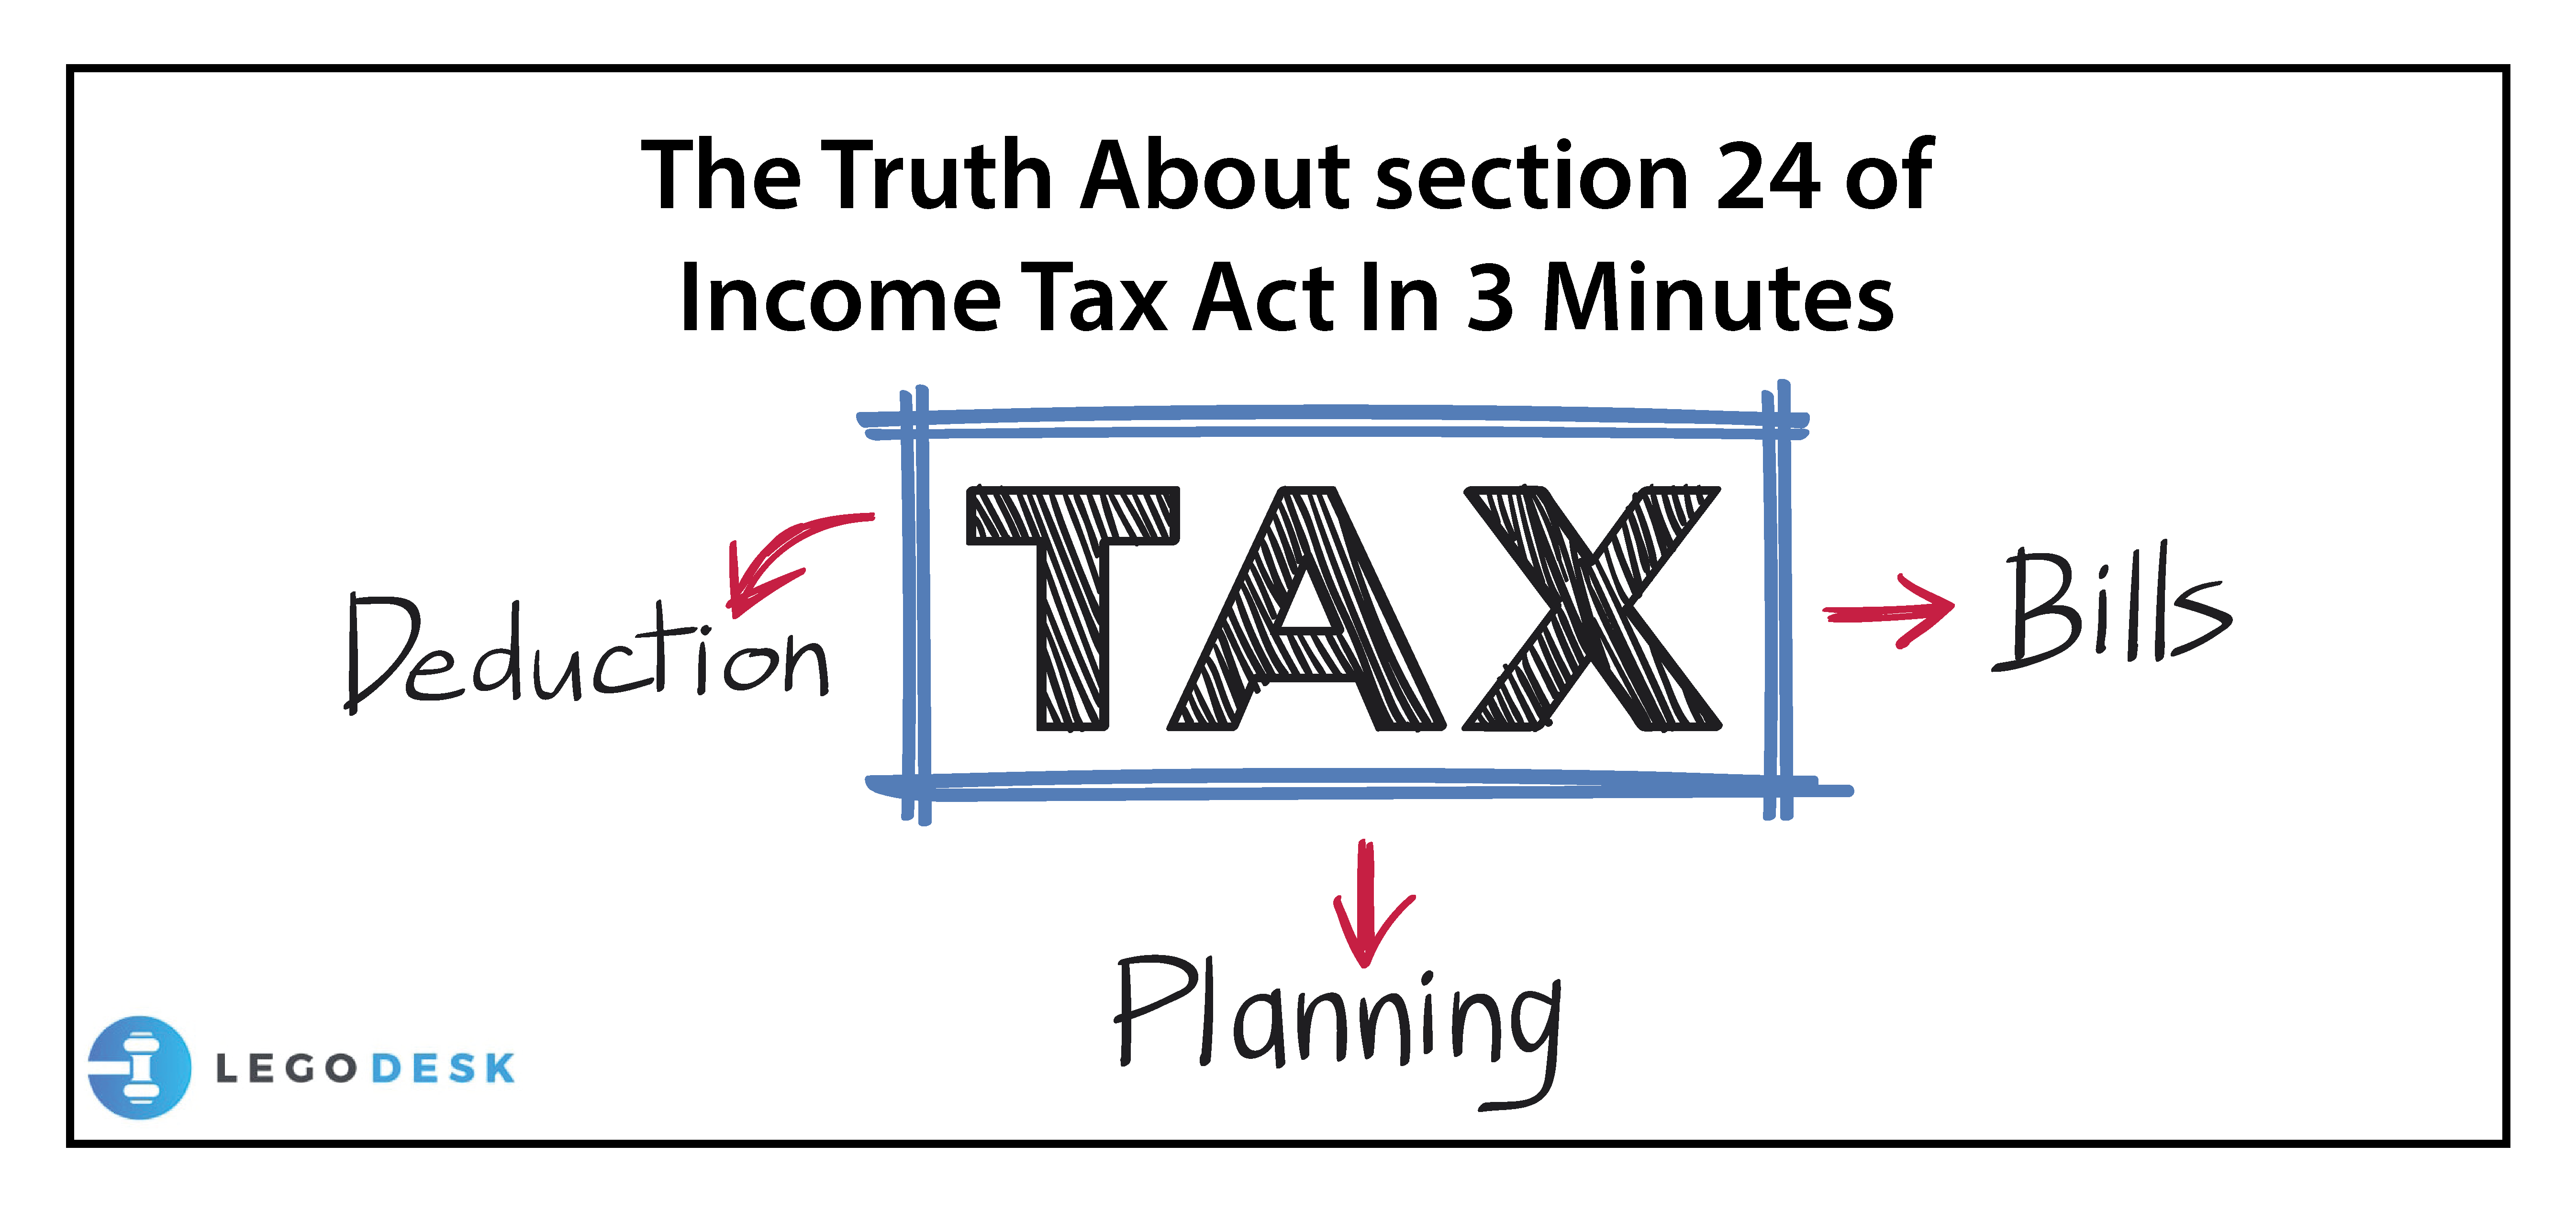 The Truth About Section 24 of Income Tax Act